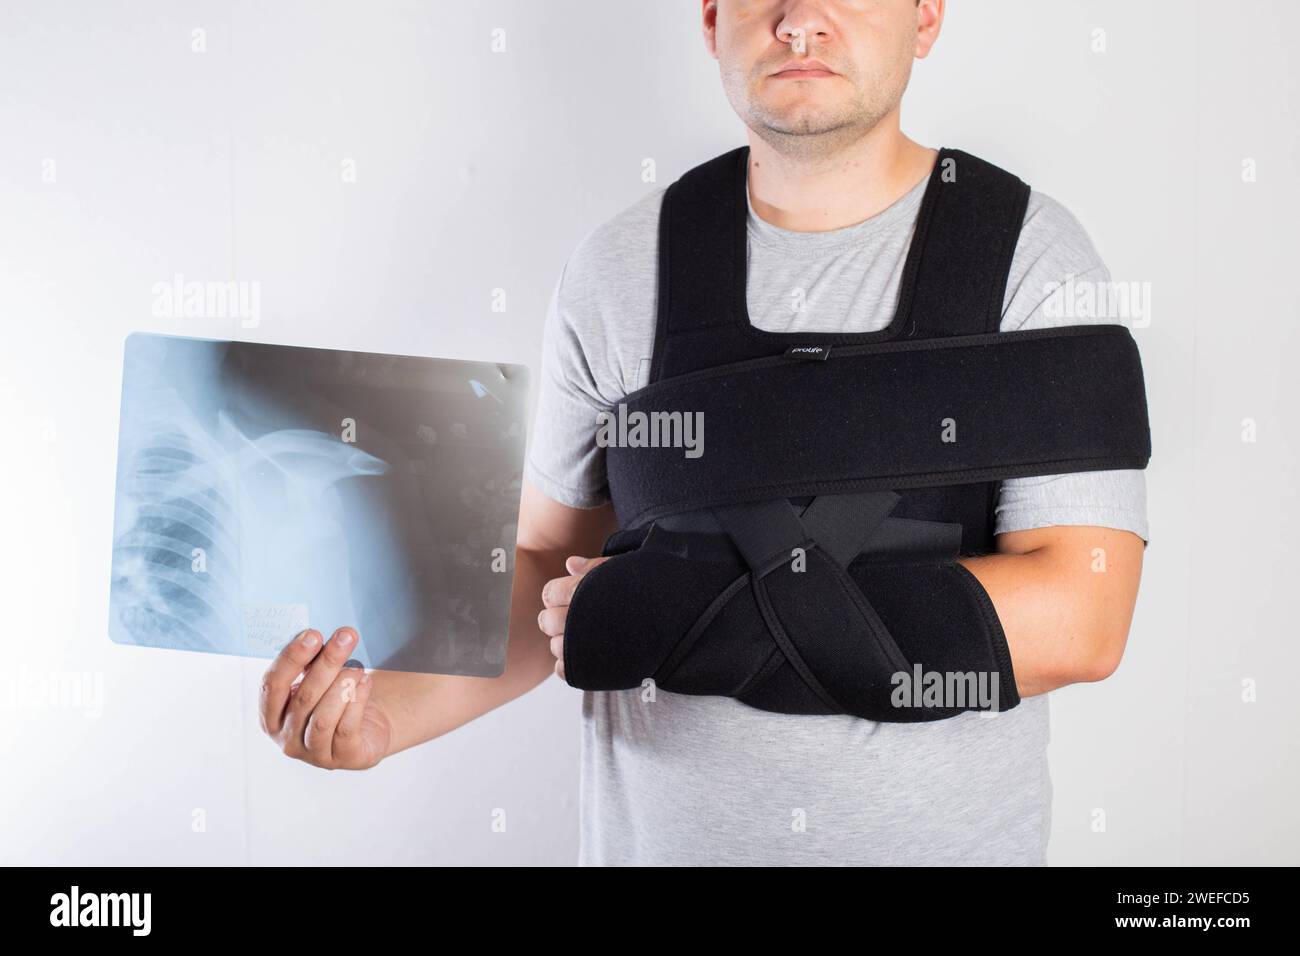 A man in a black bandage supporting the shoulder joint after surgery holds in his hand an x-ray of a dislocated shoulder and a broken arm. Rehabilitat Stock Photo